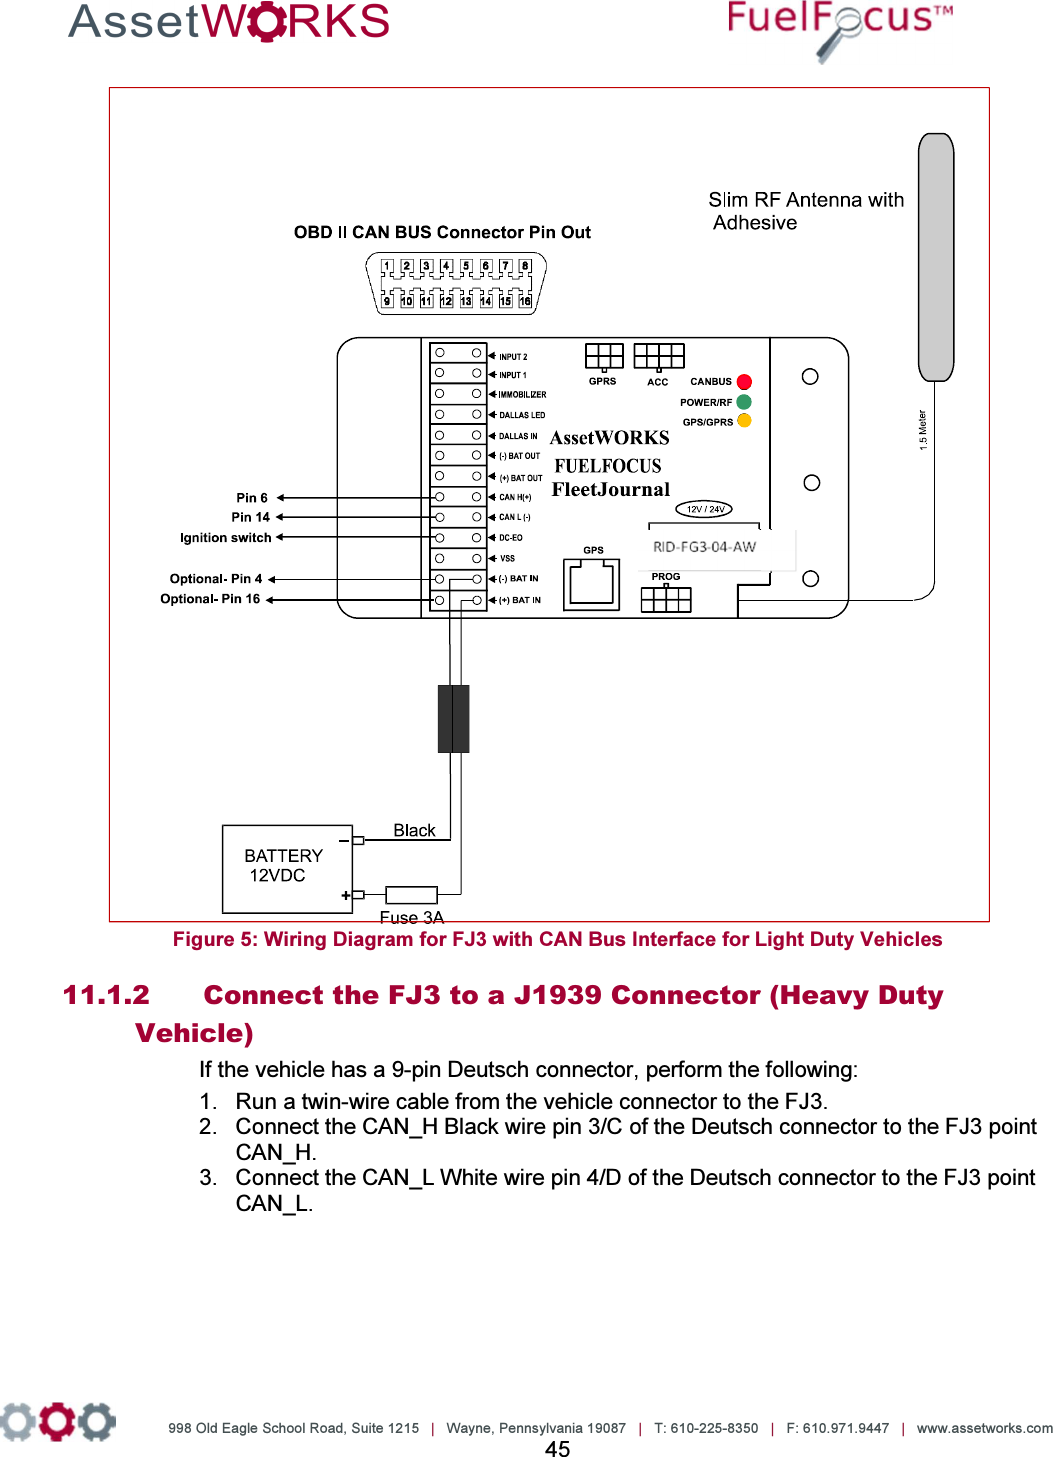                     998 Old Eagle School Road, Suite 1215   |   Wayne, Pennsylvania 19087   |   T: 610-225-8350   |   F: 610.971.9447   |   www.assetworks.com 45   Figure 5: Wiring Diagram for FJ3 with CAN Bus Interface for Light Duty Vehicles 11.1.2    Connect the FJ3 to a J1939 Connector (Heavy Duty Vehicle) If the vehicle has a 9-pin Deutsch connector, perform the following: 1.  Run a twin-wire cable from the vehicle connector to the FJ3. 2.  Connect the CAN_H Black wire pin 3/C of the Deutsch connector to the FJ3 point CAN_H. 3.  Connect the CAN_L White wire pin 4/D of the Deutsch connector to the FJ3 point CAN_L.   